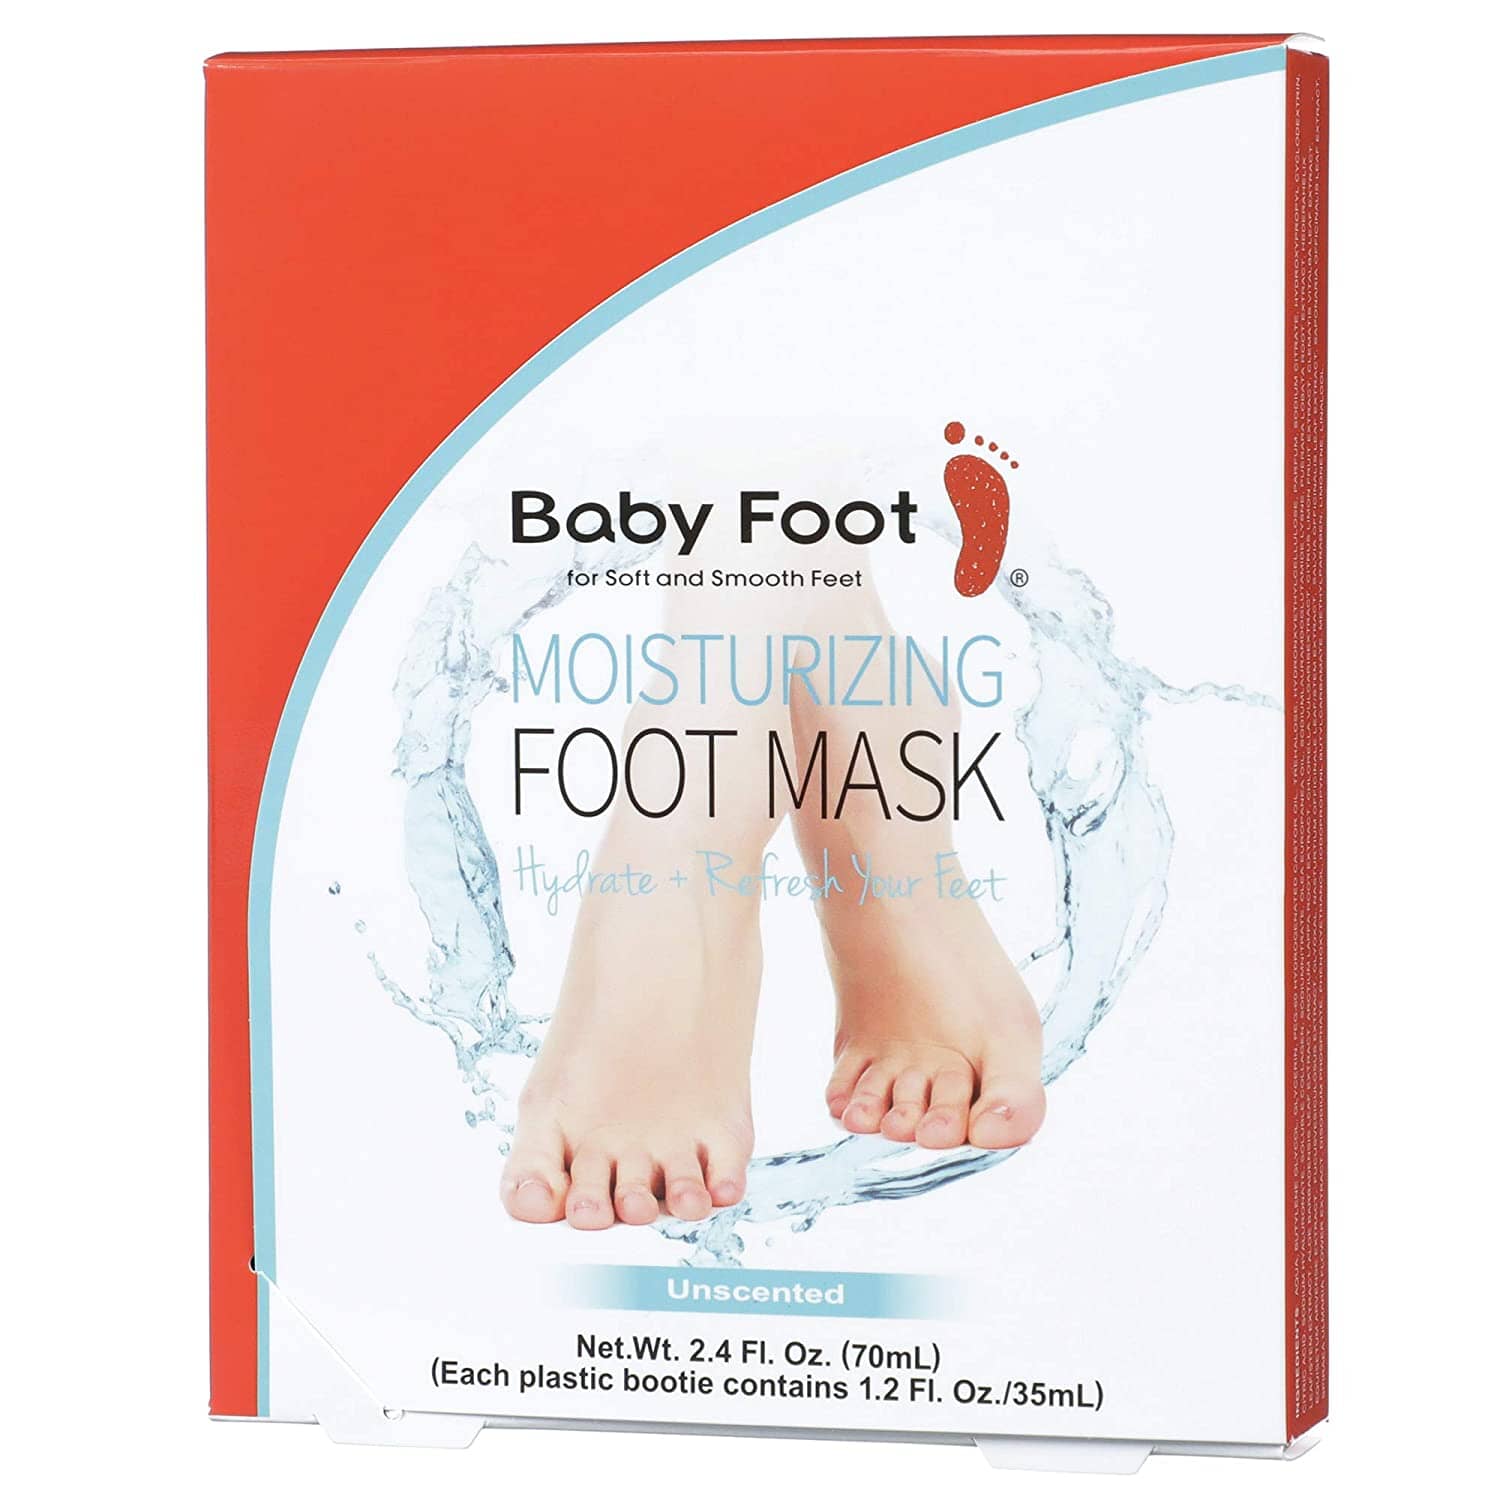 Baby Foot Moisturizing Foot Mask Baby Foot Shop at Exclusive Beauty Club